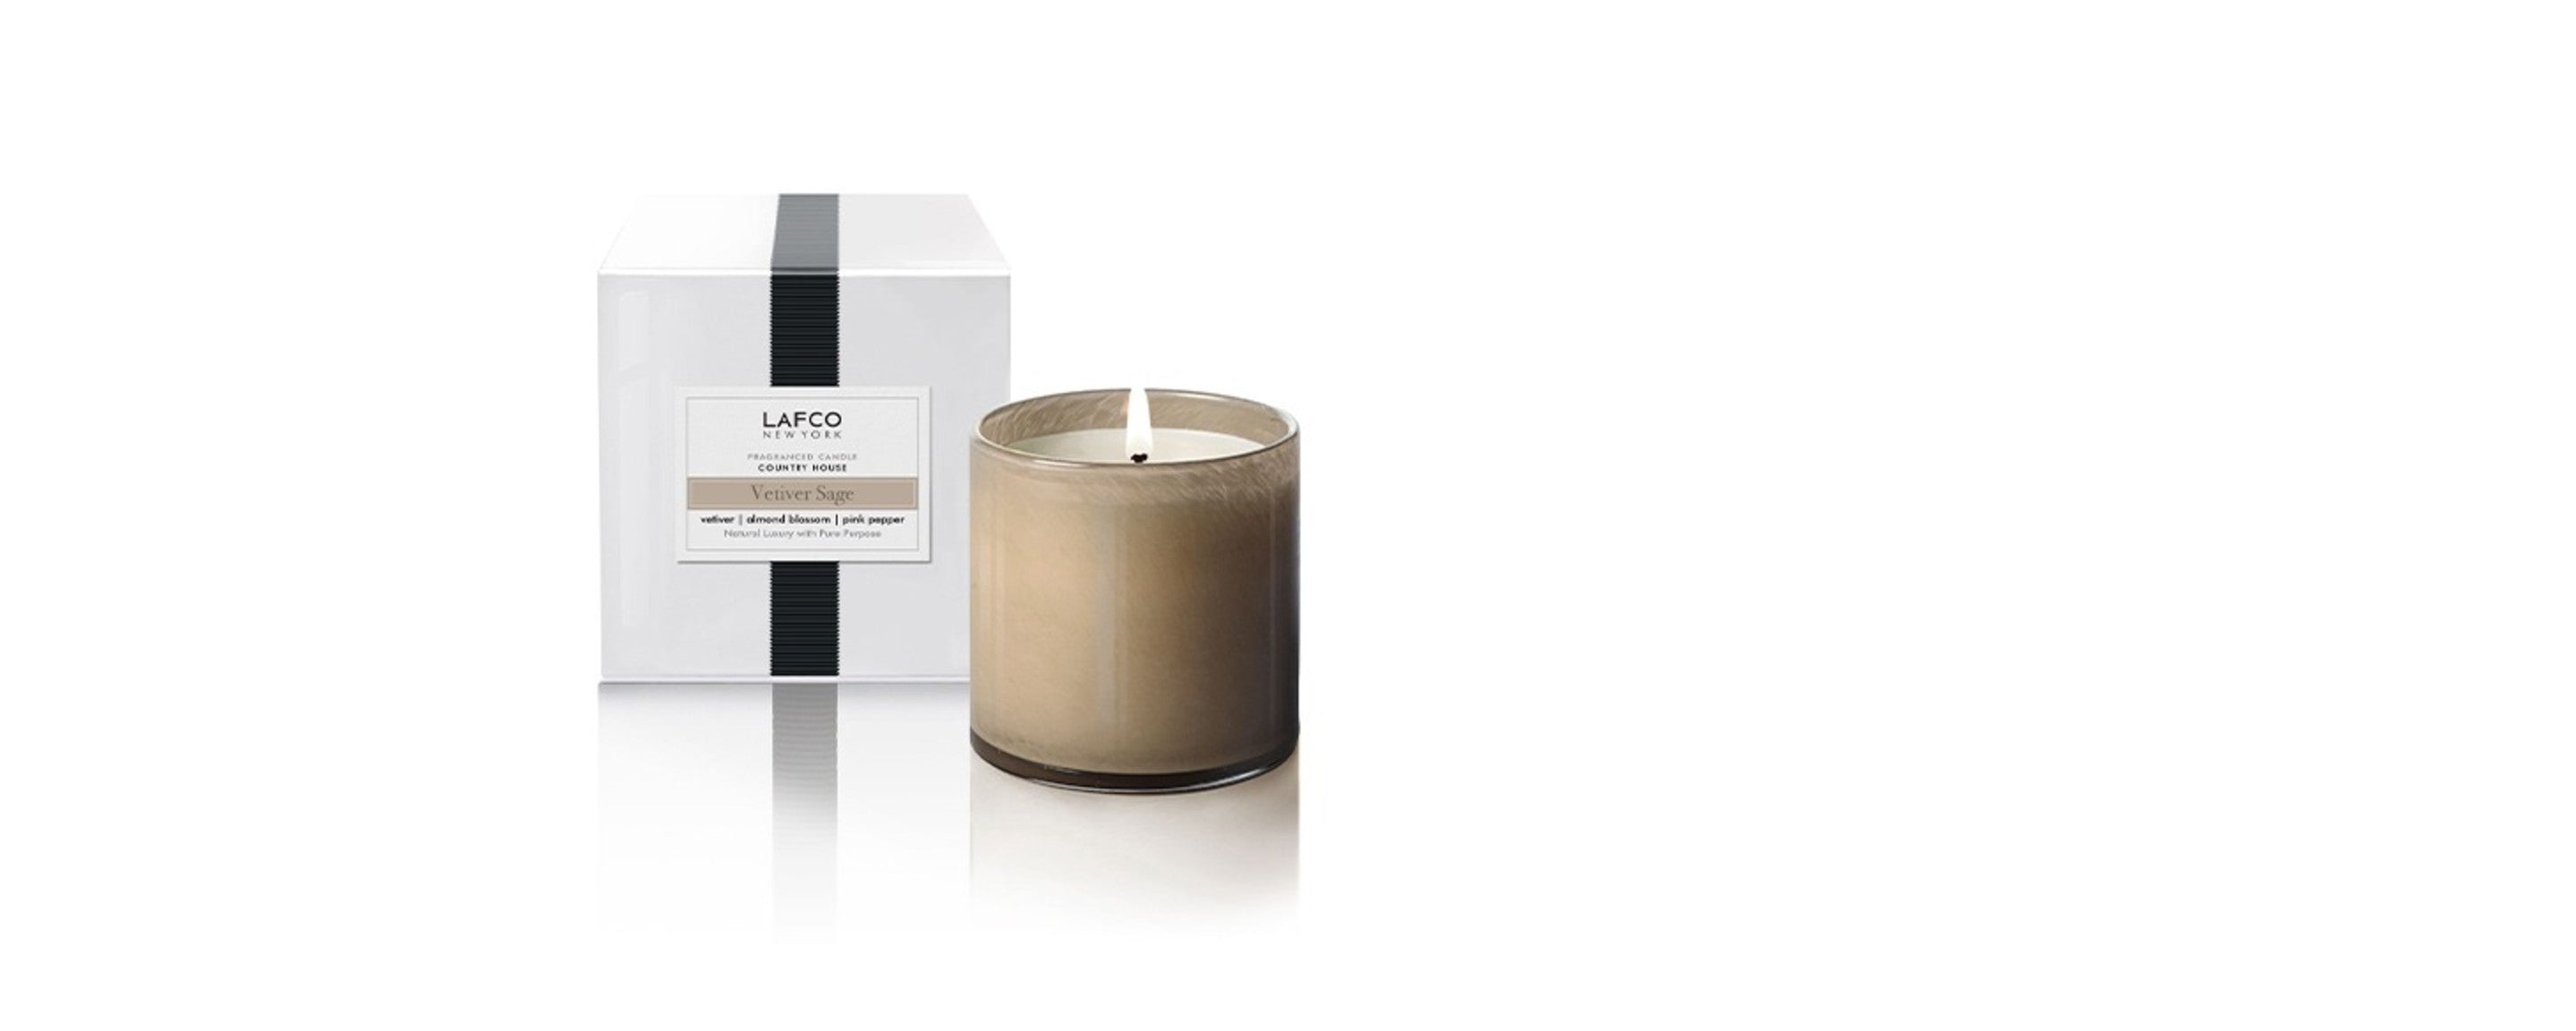 vetiver sage country house candle by lafco new york